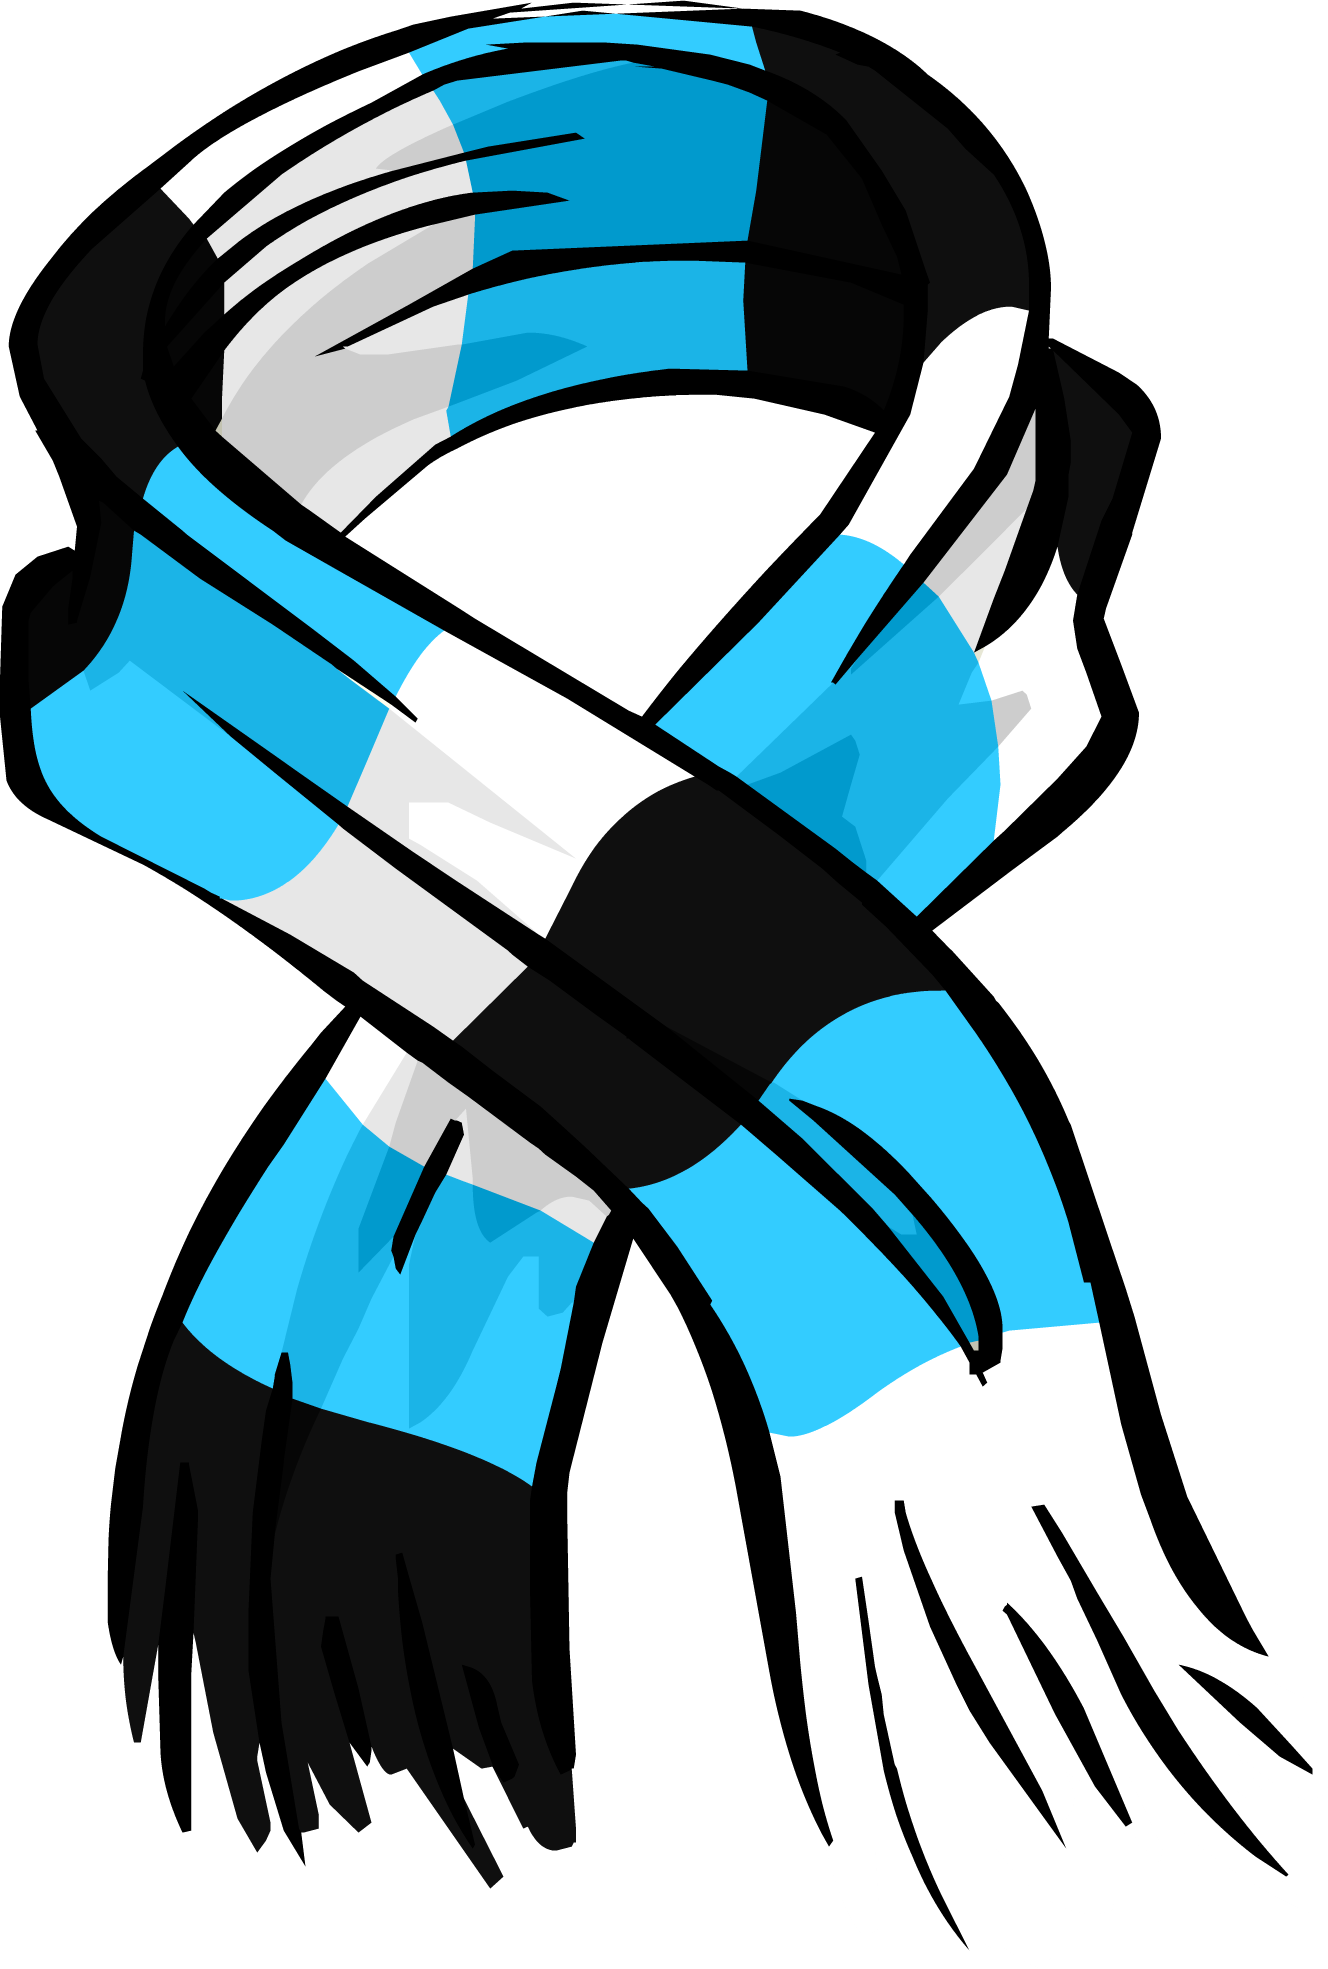 mittens clipart scarf